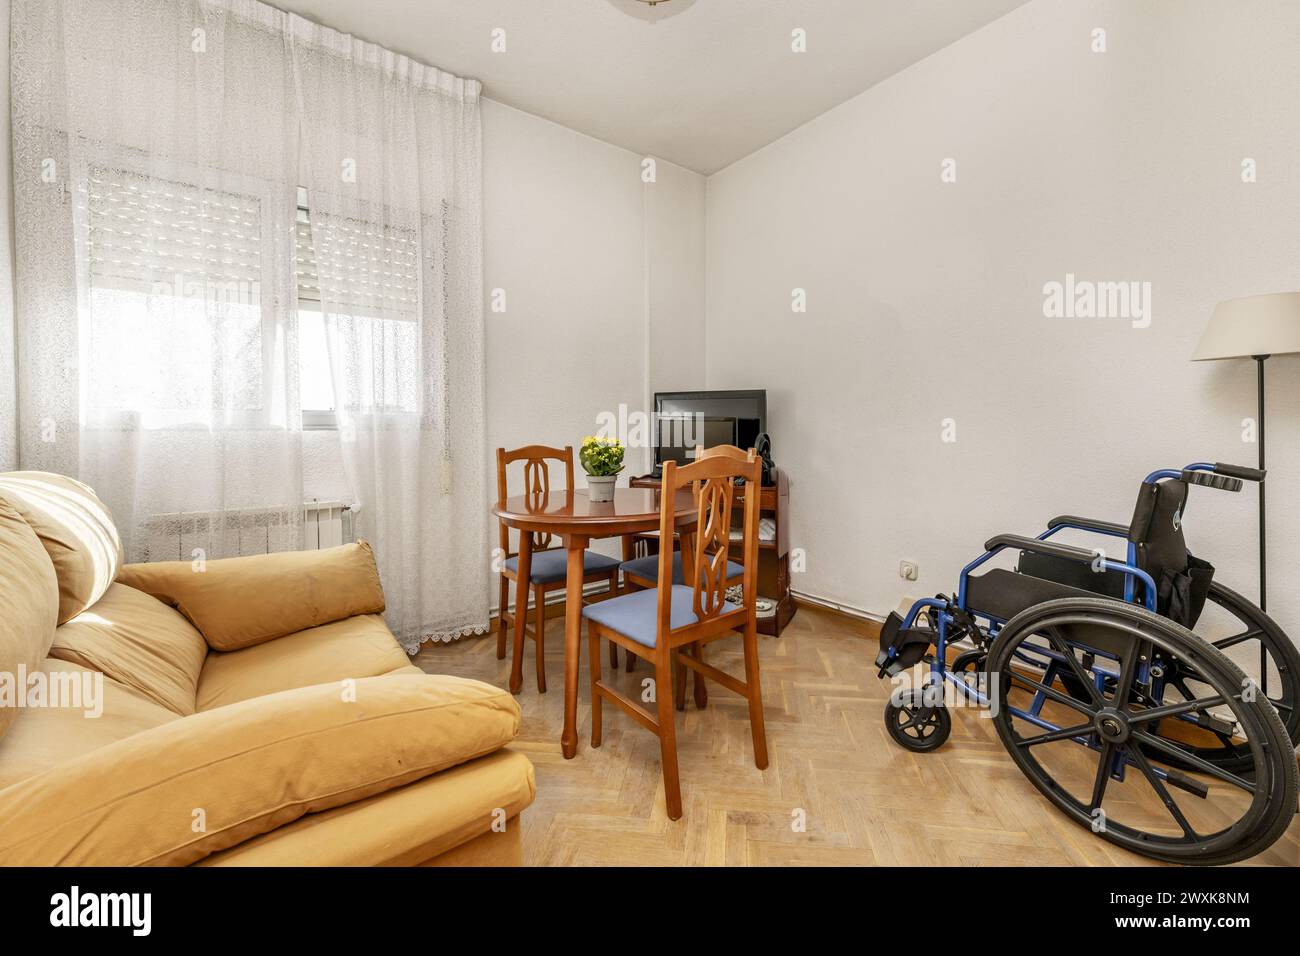 Corner of a small living room with round wooden table with matching chairs upholstered in blue microfiber with a black wheelchair next to it Stock Photo